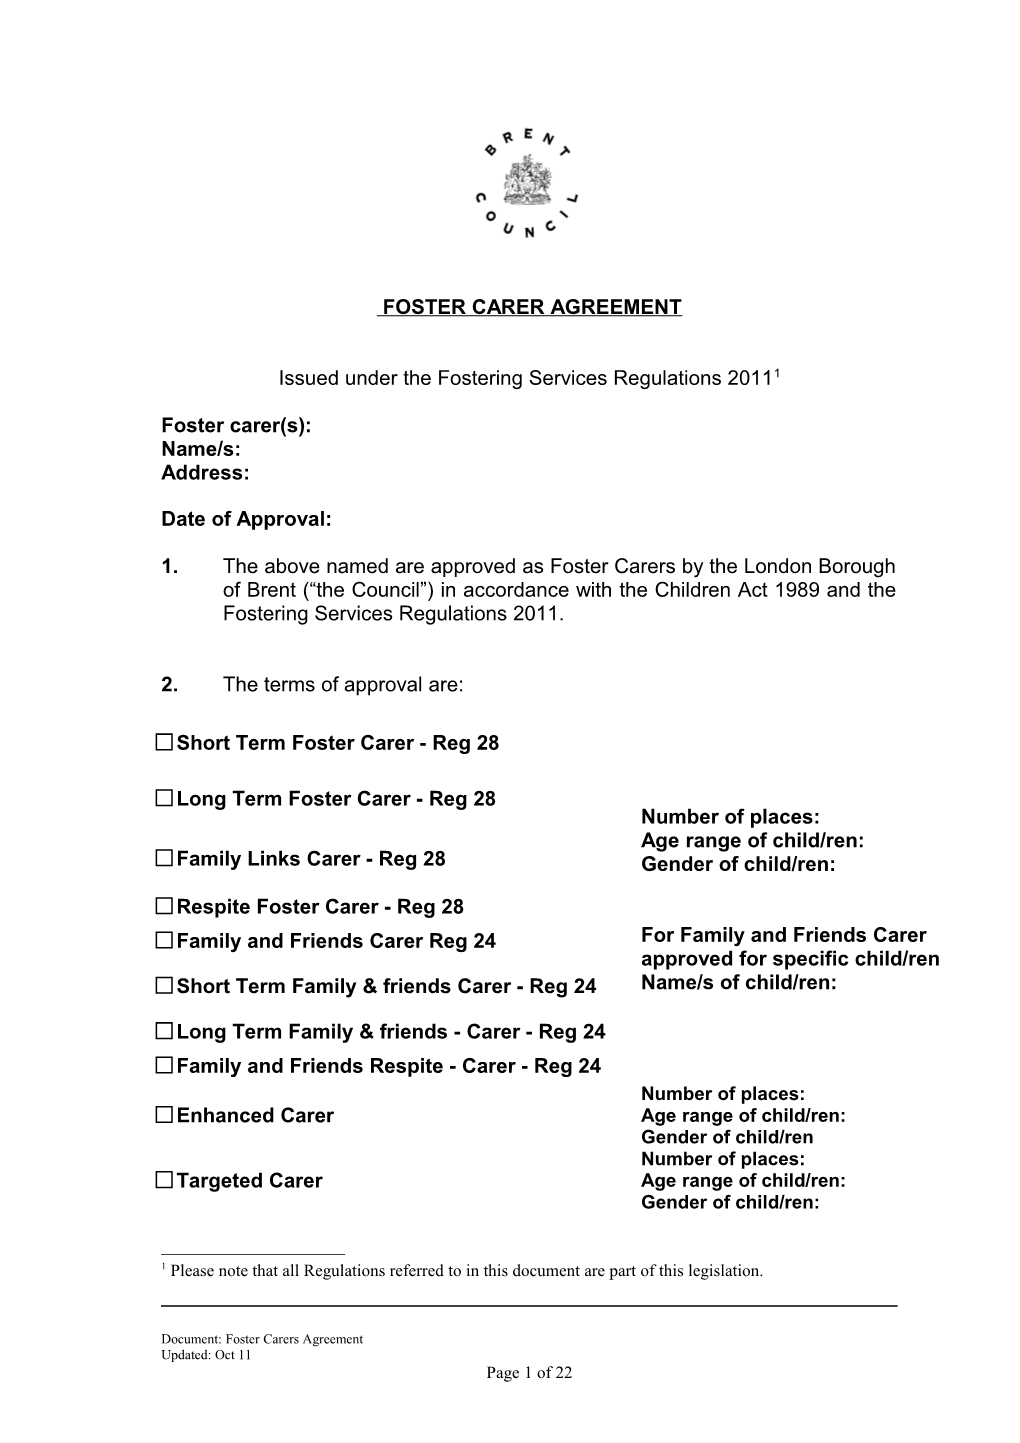 Issued Under the Fostering Services Regulations 2011 1